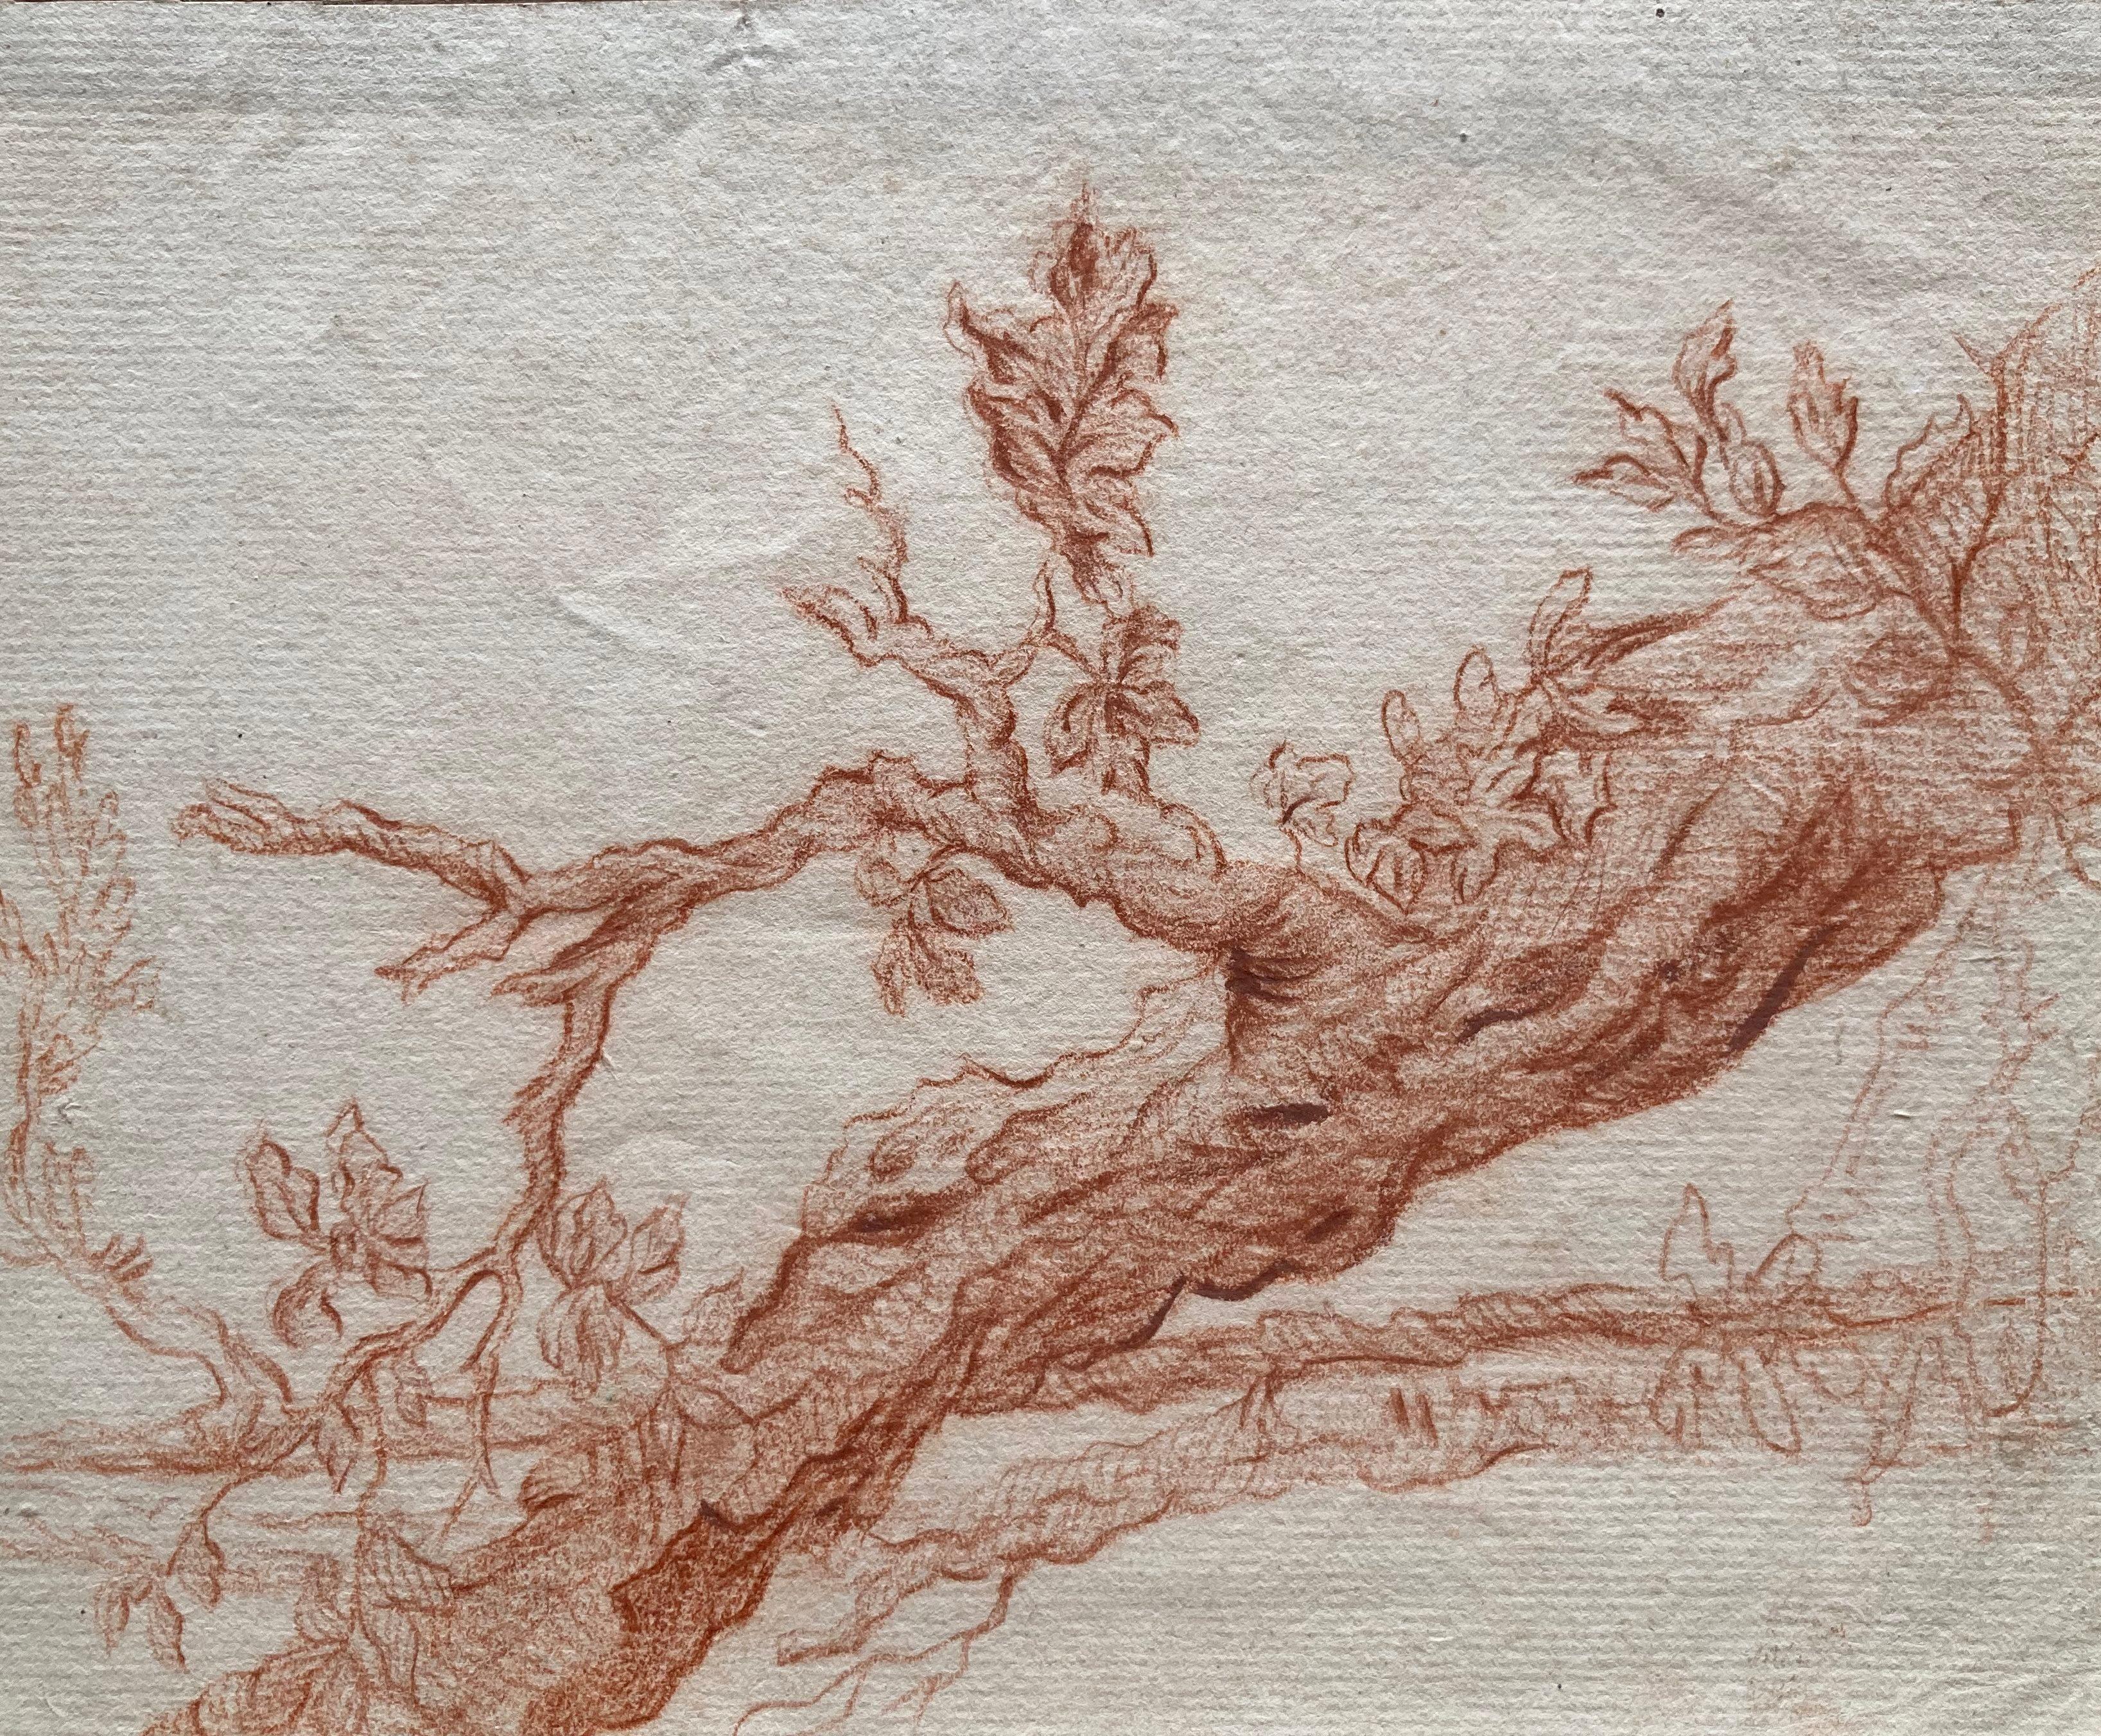 Unknown Landscape Art - Flemish Artist, Study of a Tree Trunk, Sanguine, Old Master Drawing